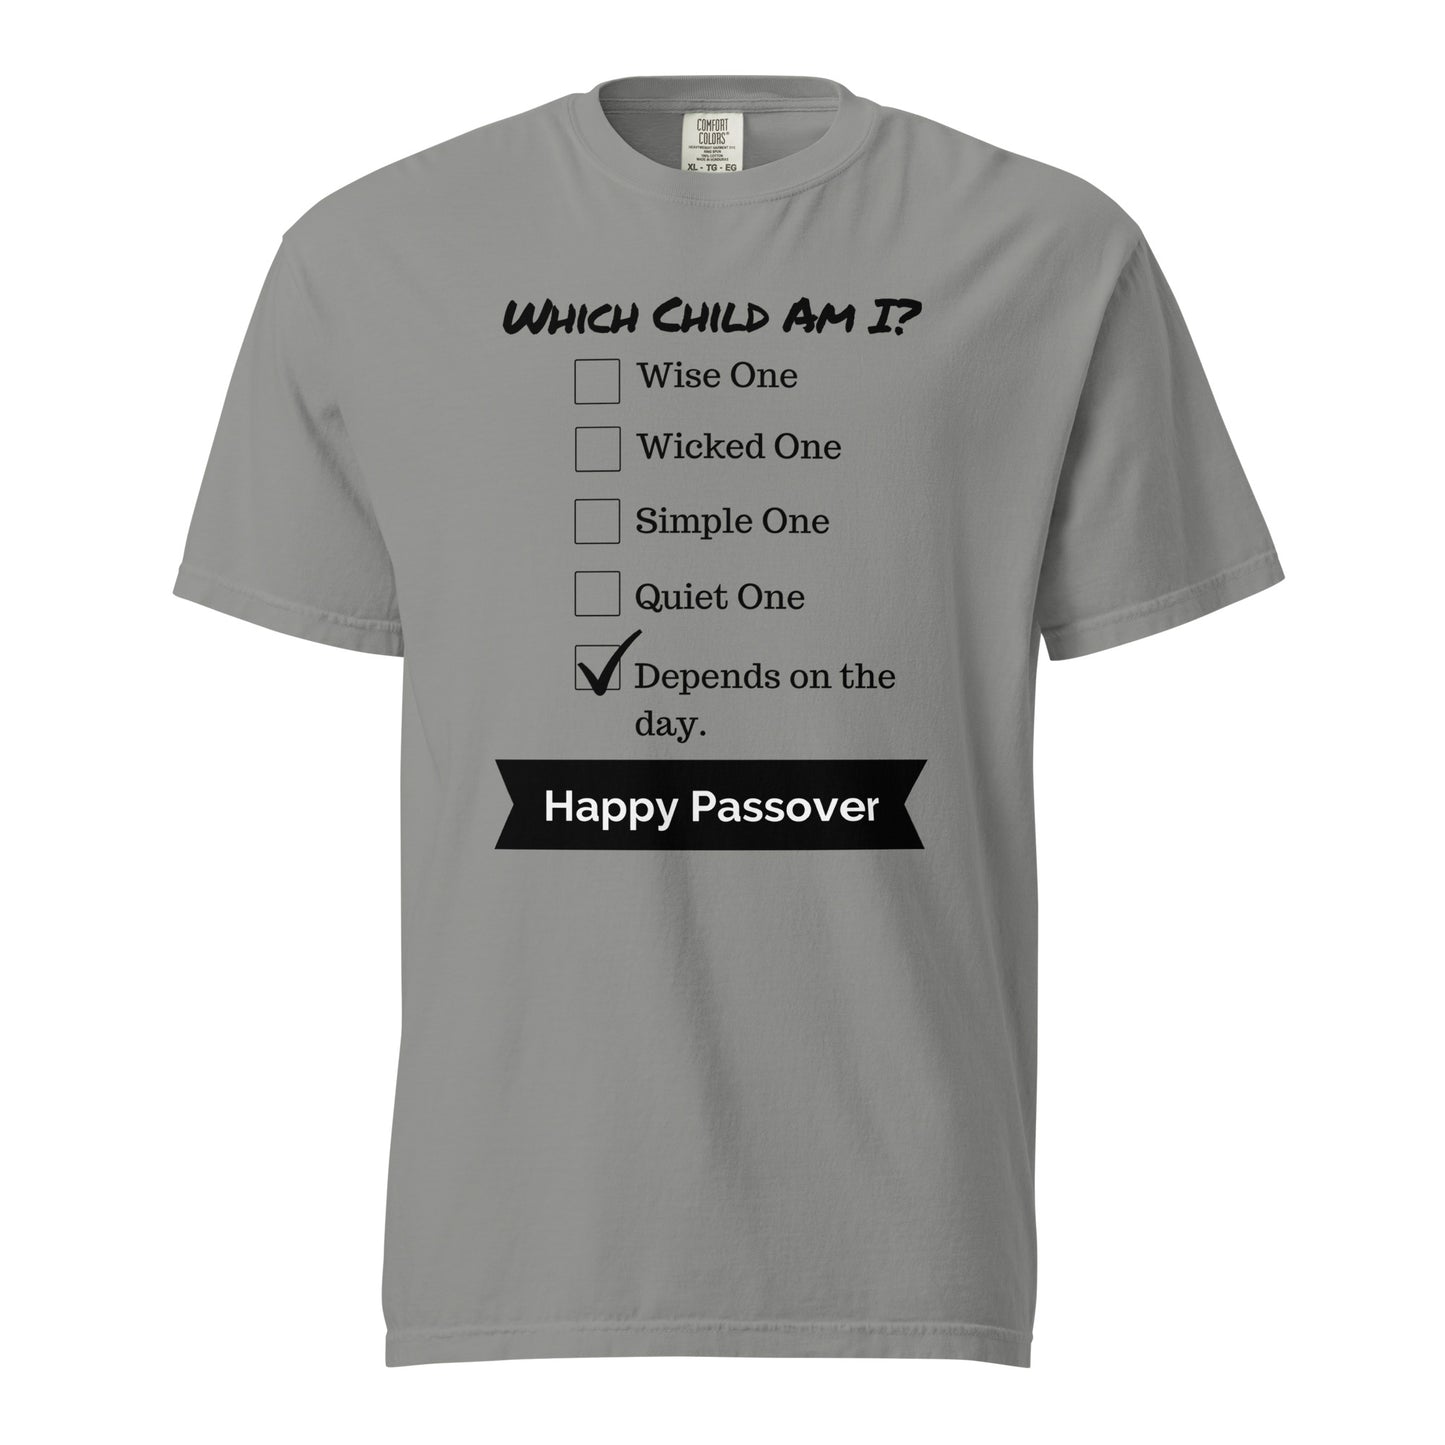 Which Child Am I Funny Seder Shirt